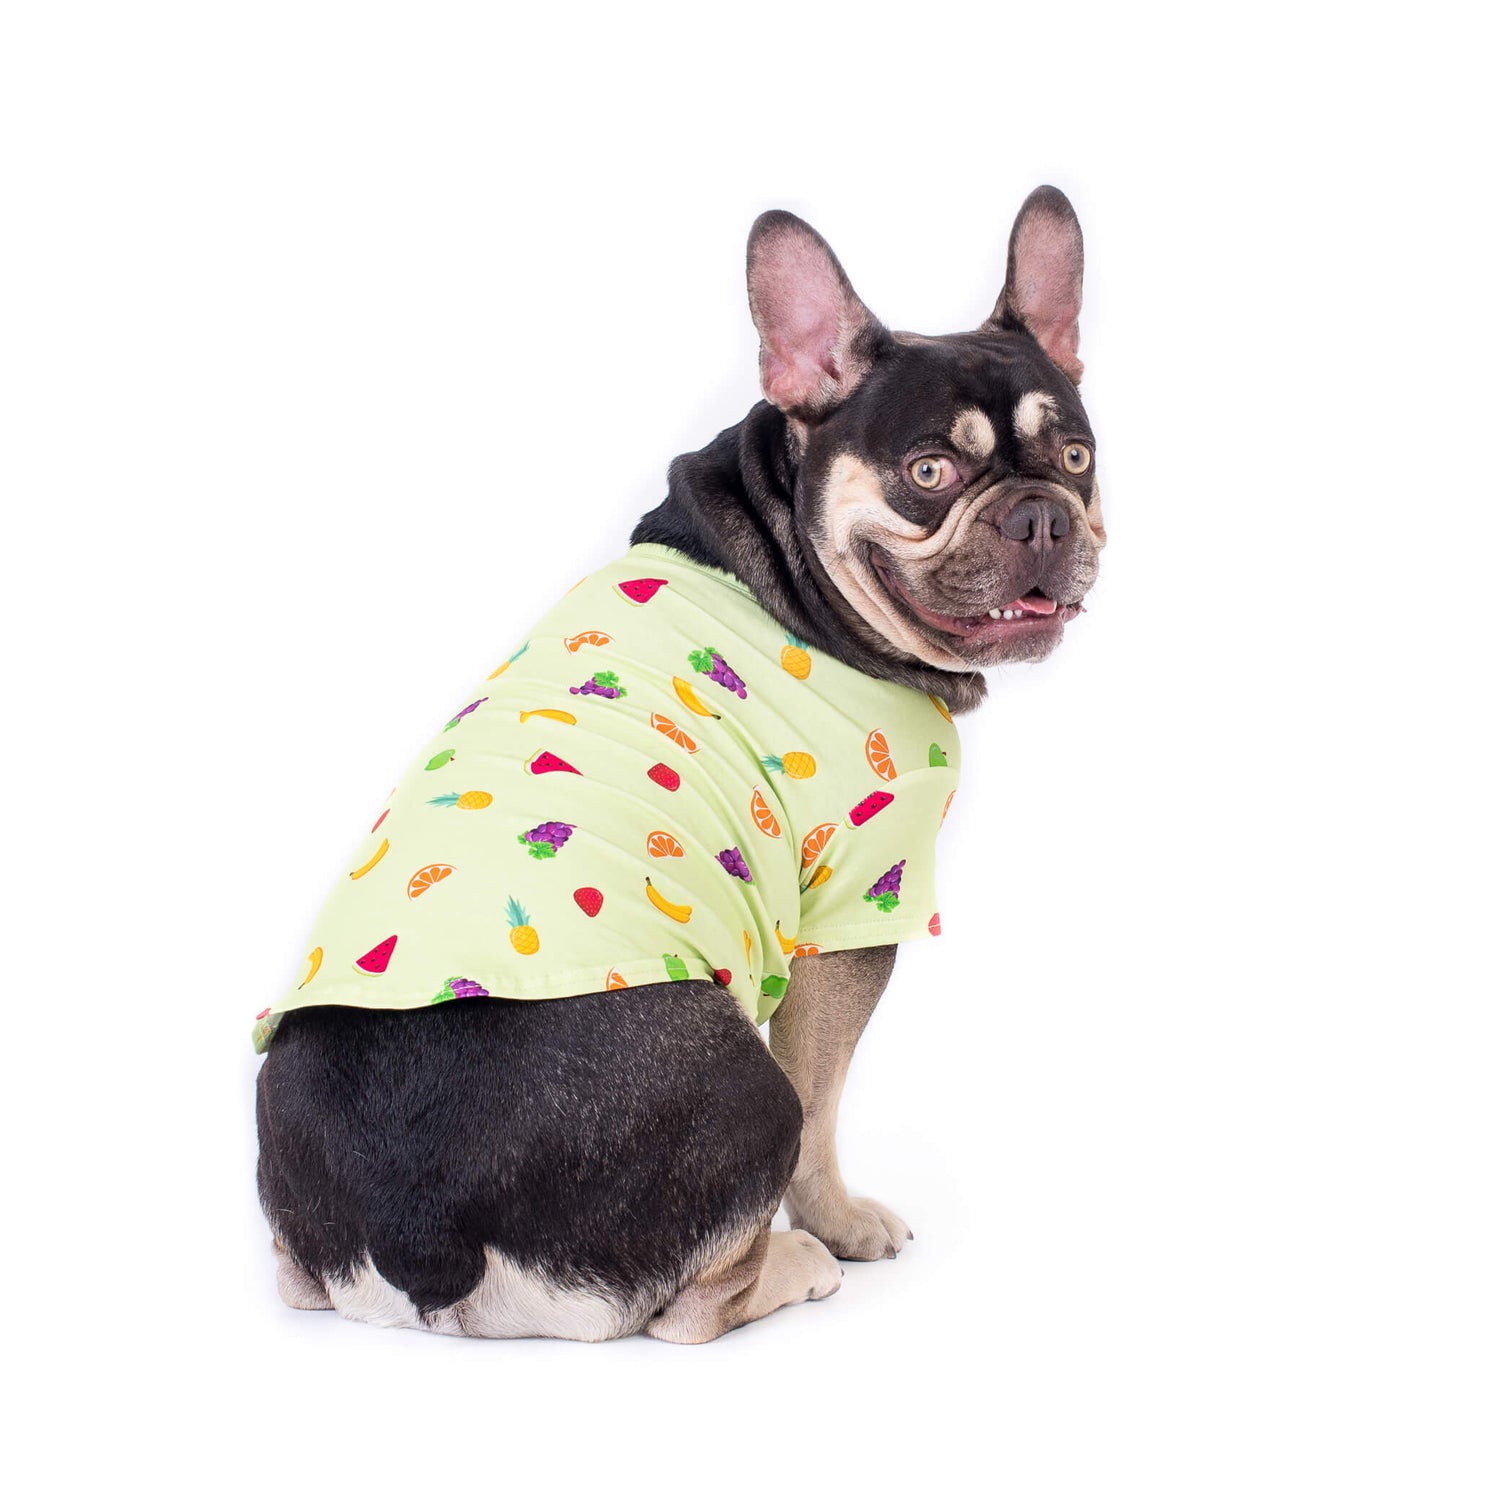 "Captivating French Bulldog sporting a trendy Feelin'Fruity dog shirt, facing away but gazing captivatingly at the camera with an air of style and curiosity